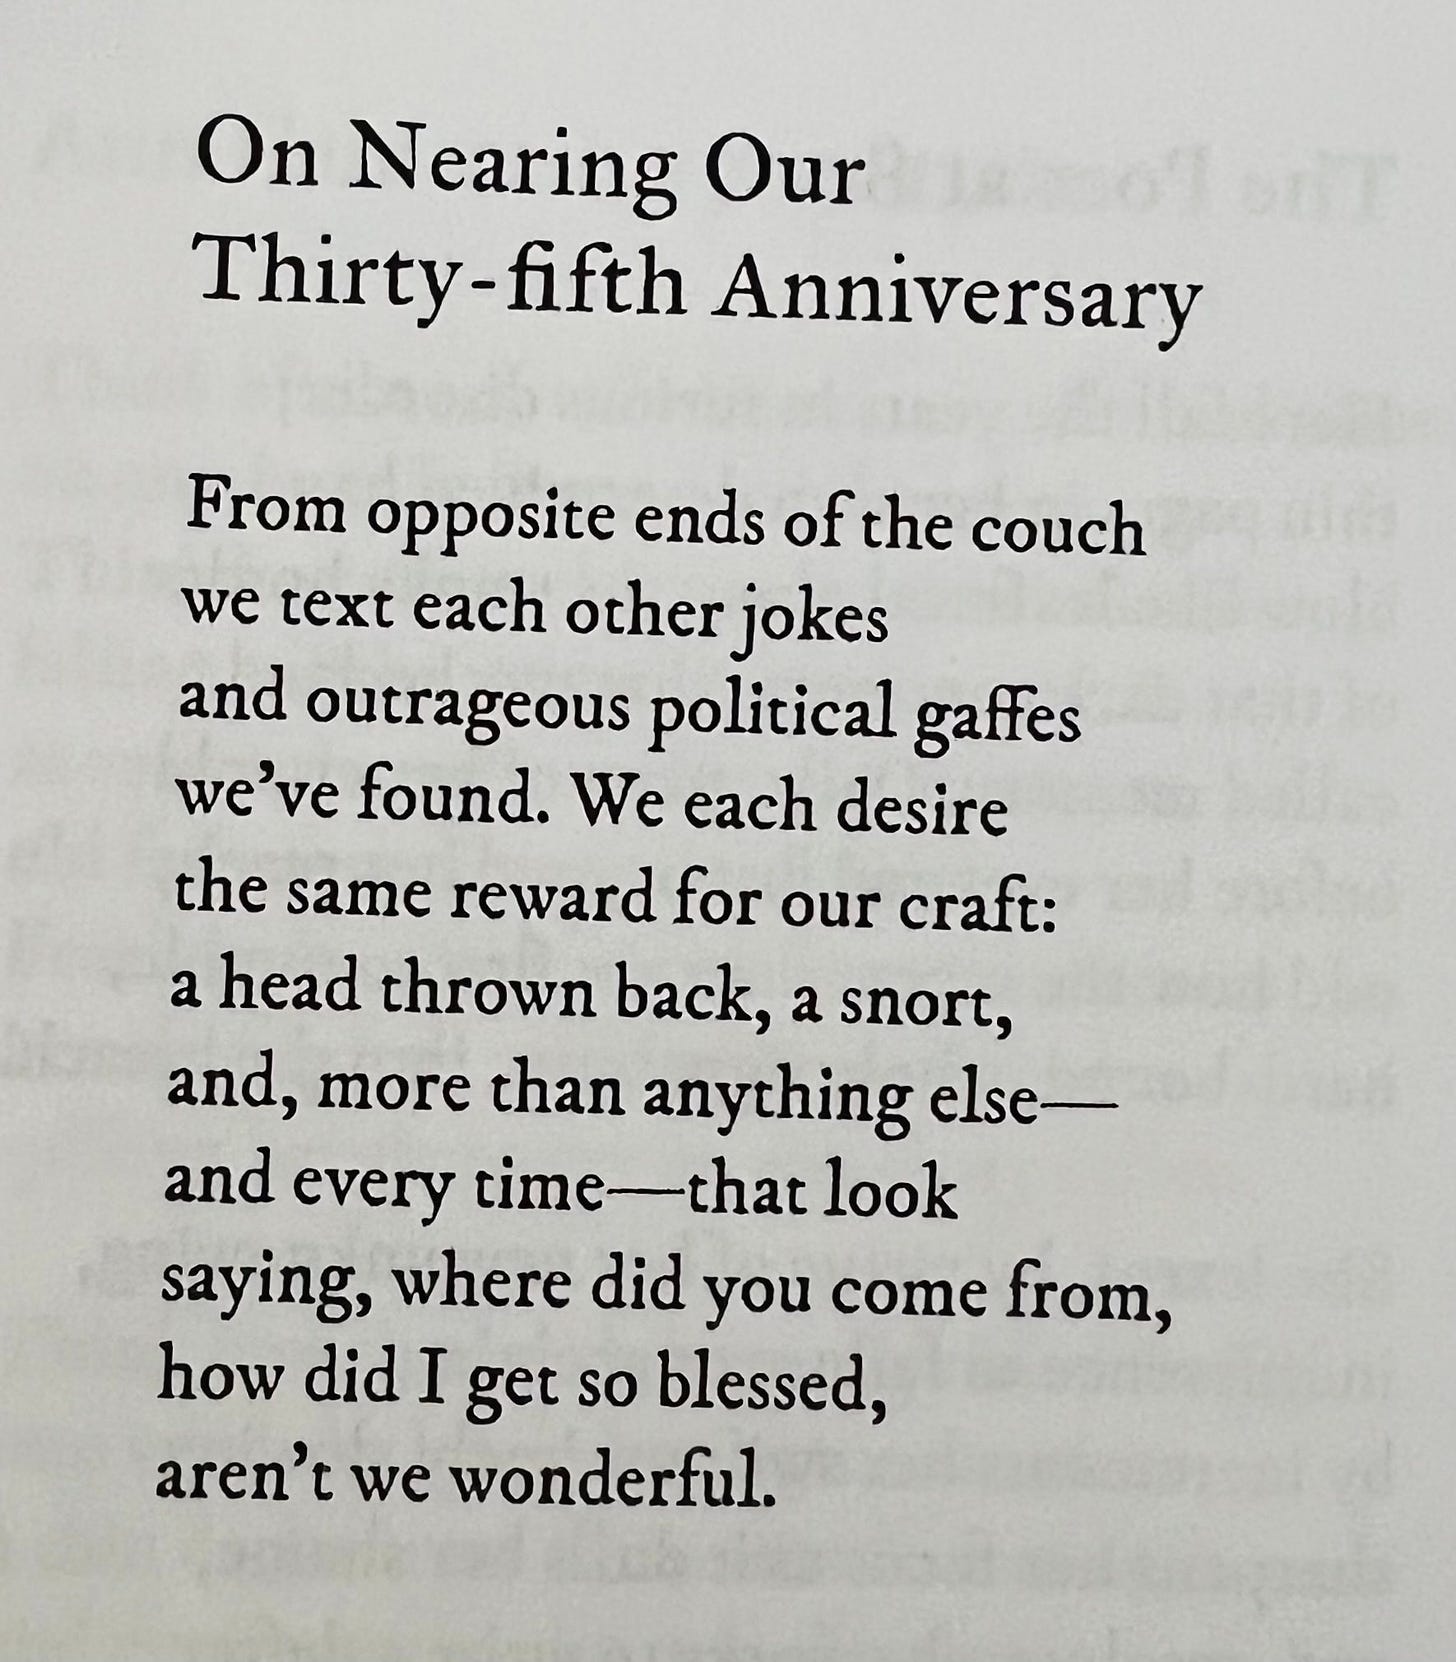 On Nearing Our Thirty-fifth Anniversary by Jane Greer. From opposite ends of the couch / we text each other jokes / and outrageous political gaffes / we've found. We each desire / the same reward for our craft: